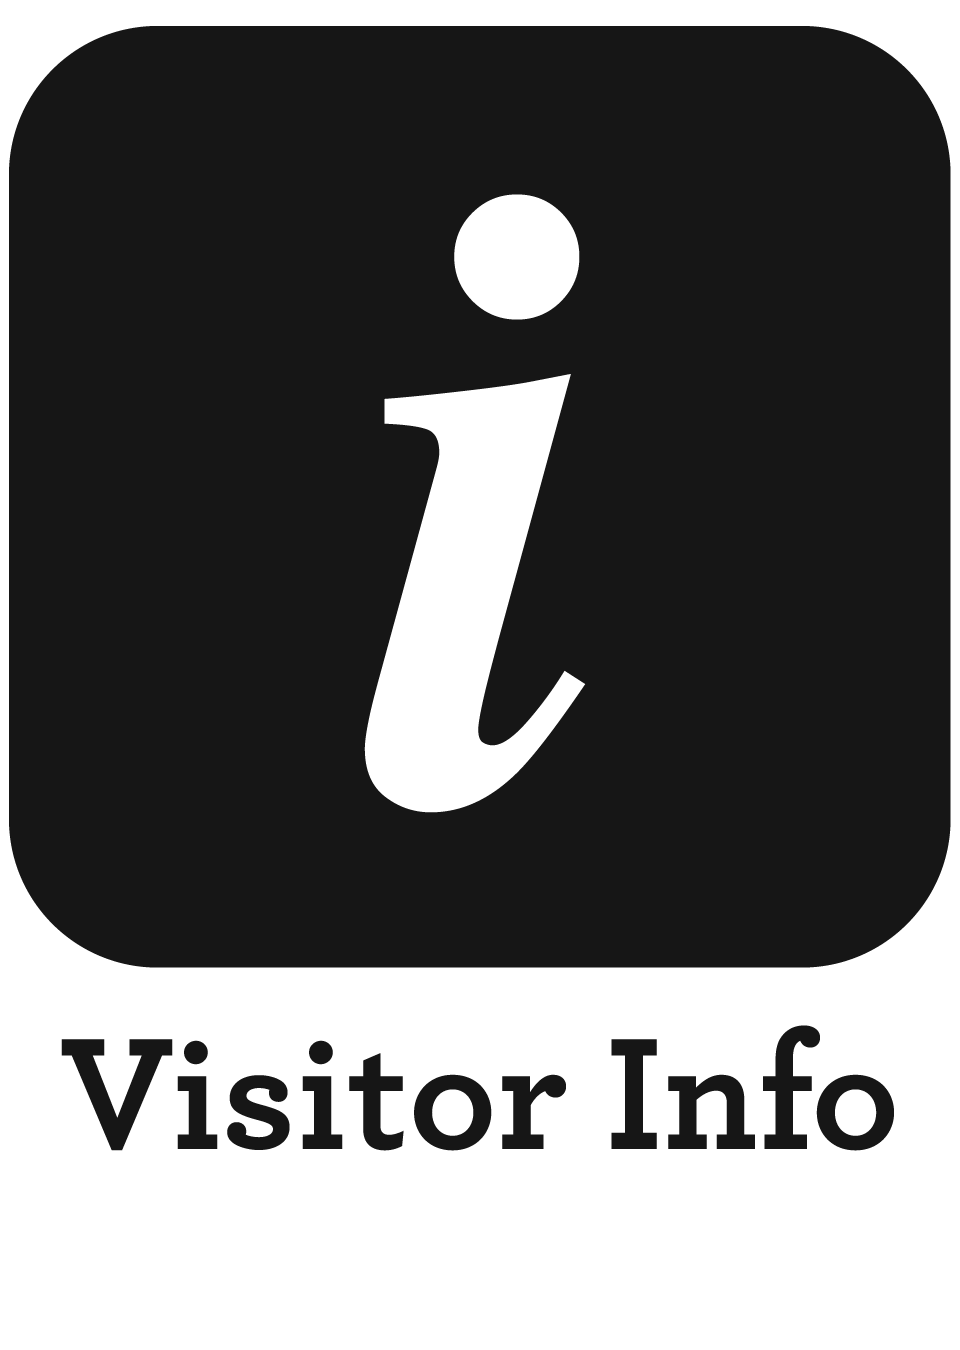 Visitor Info.png